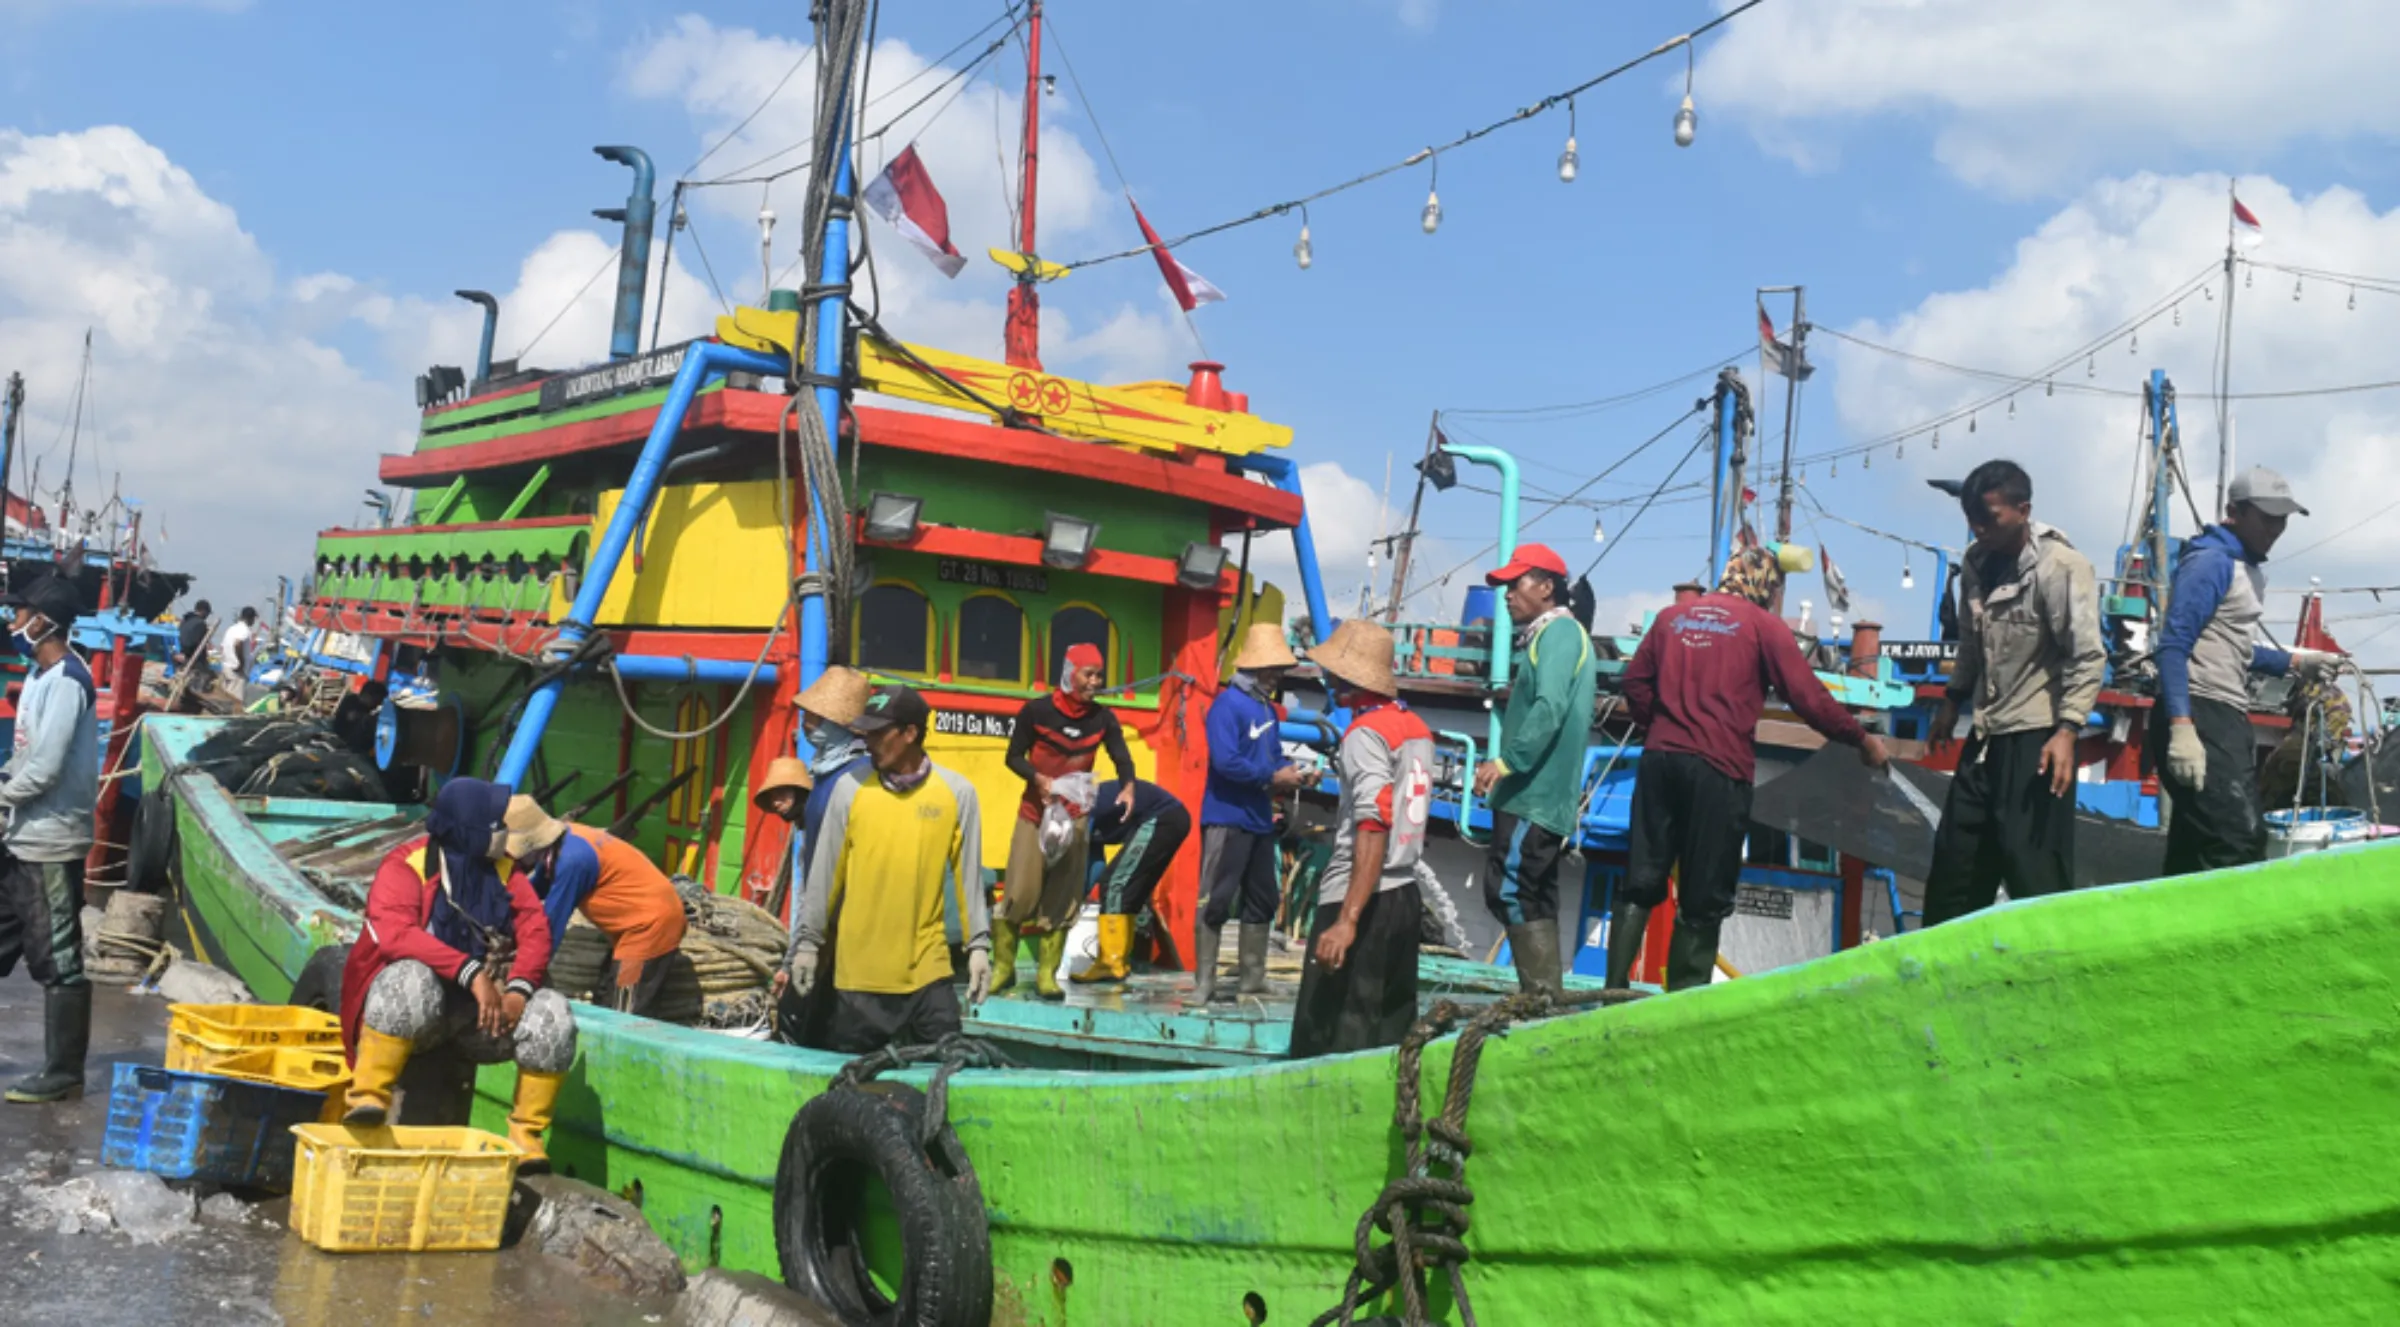 A boat crew cleans up after unloading the day’s catch at the port of Tasikagung, in Central Java, Indonesia, August 12, 2022